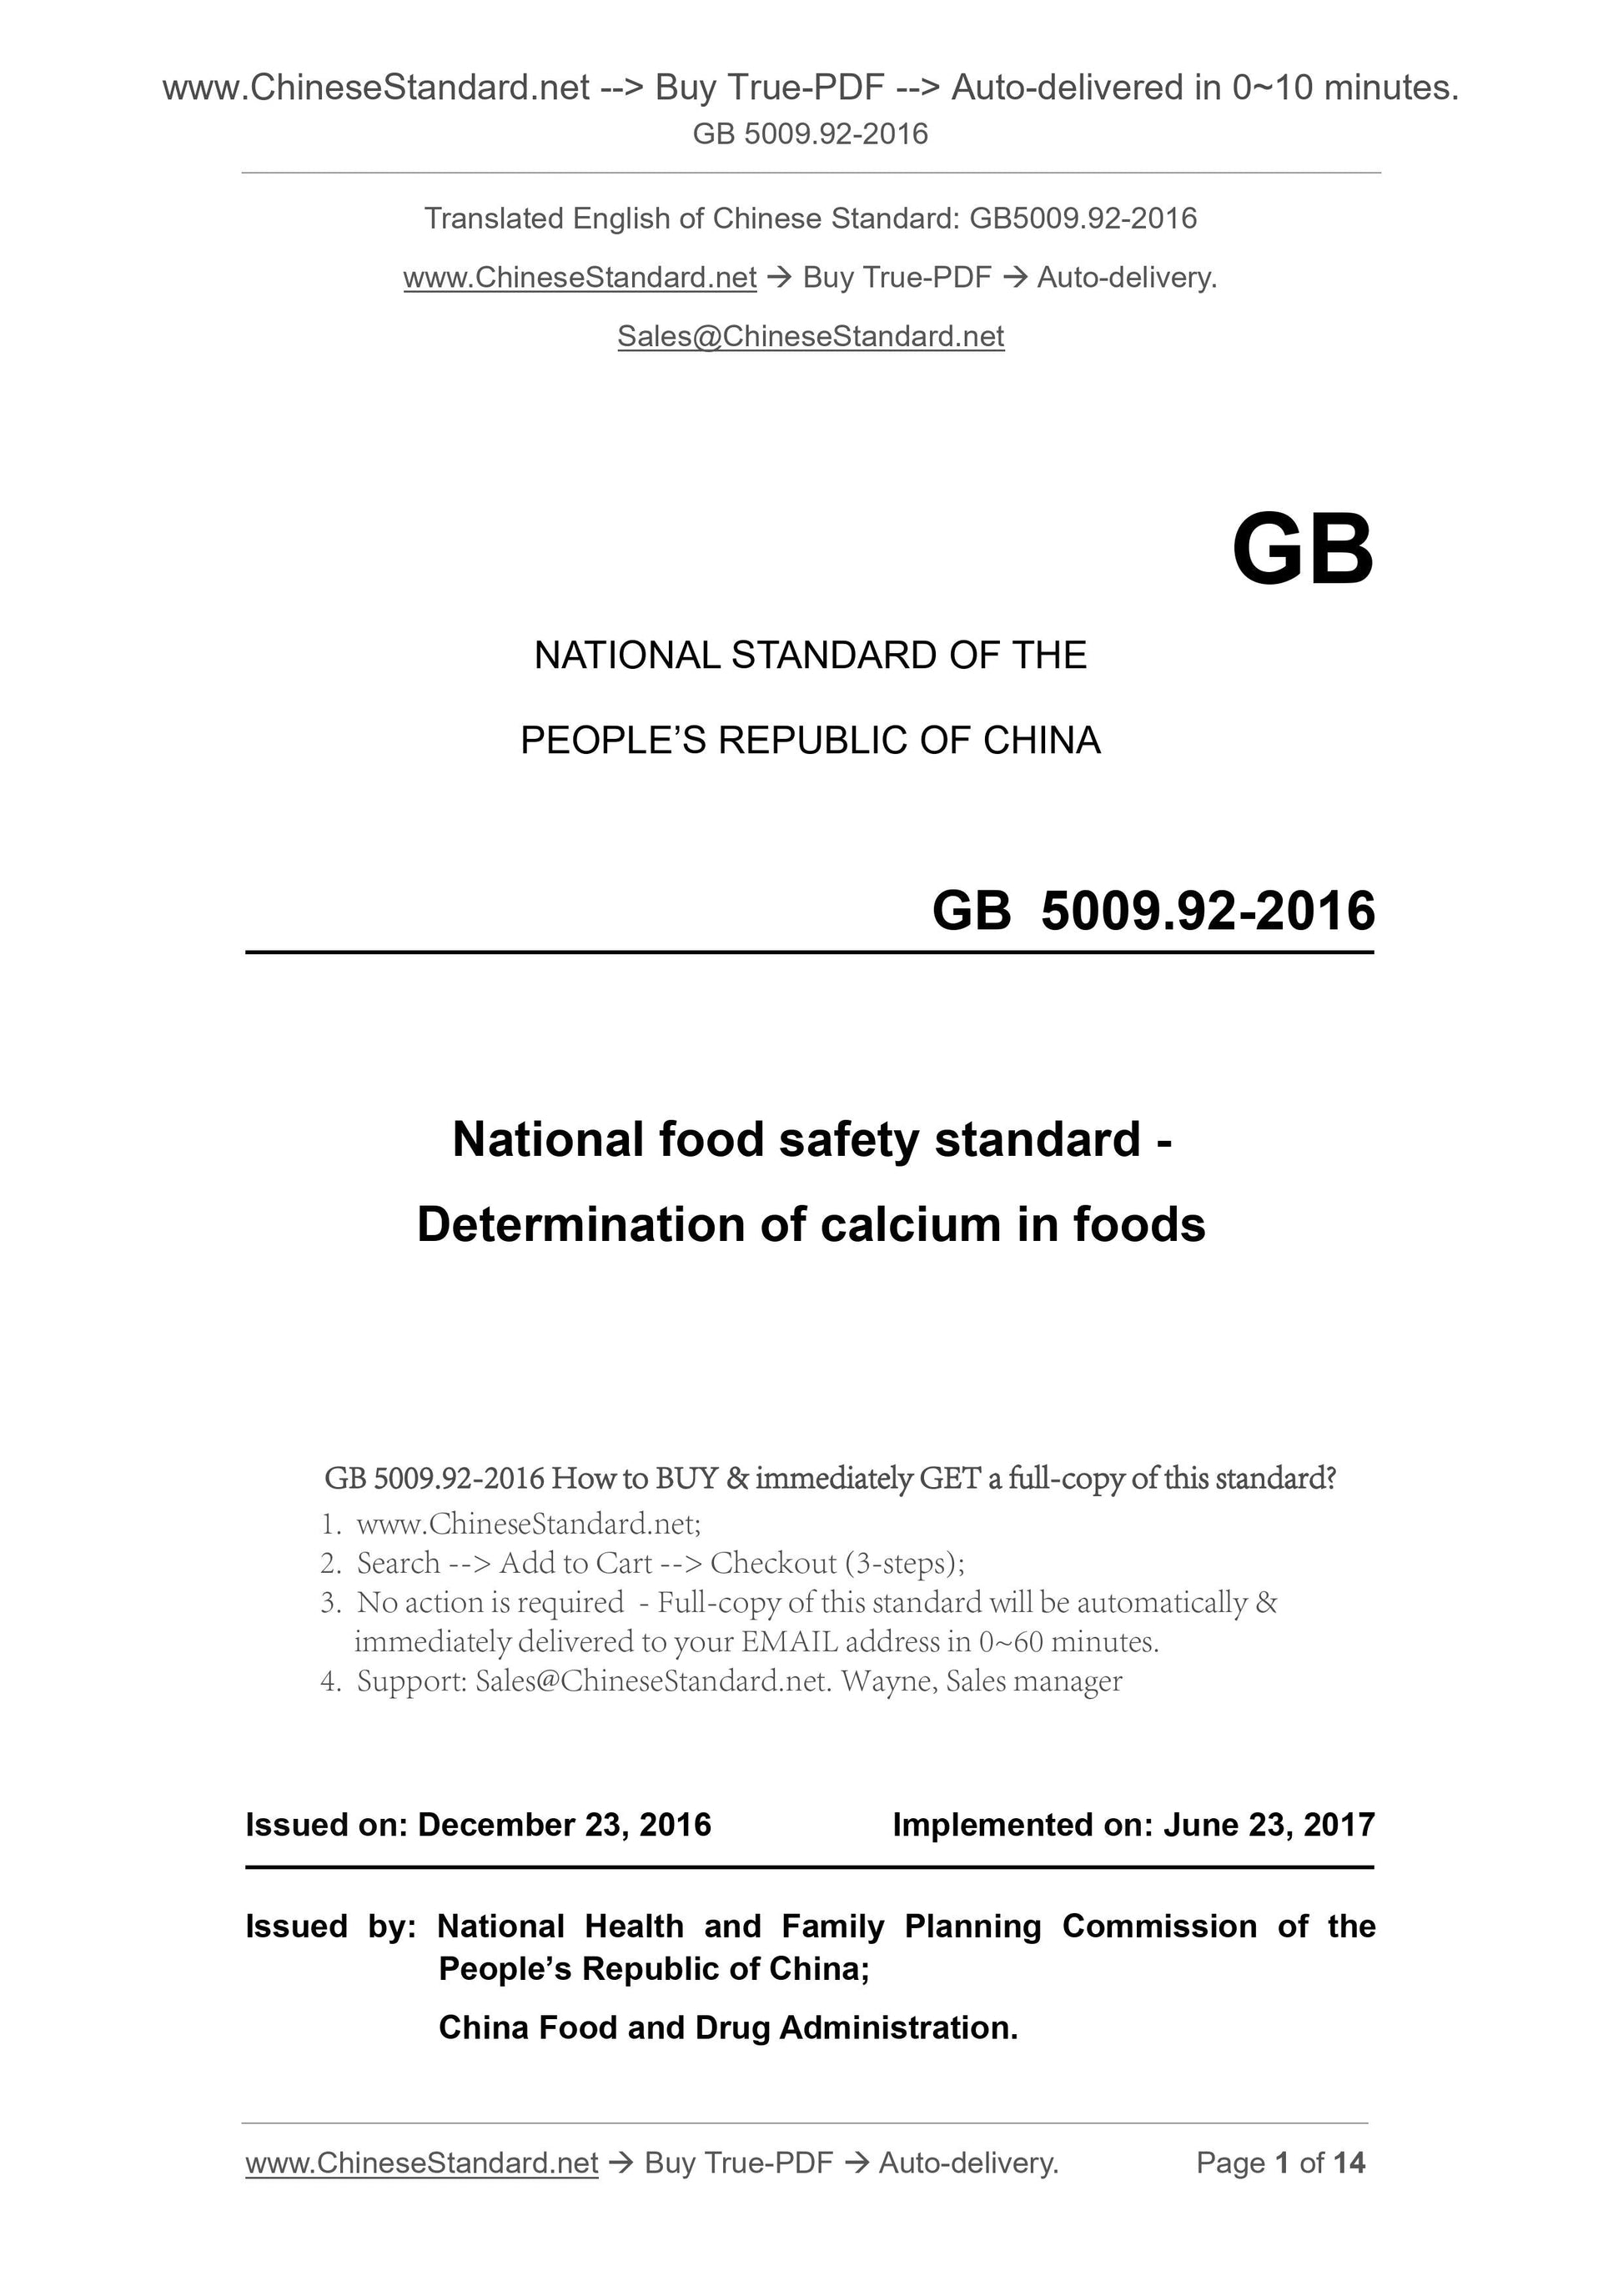 GB 5009.92-2016 Page 1